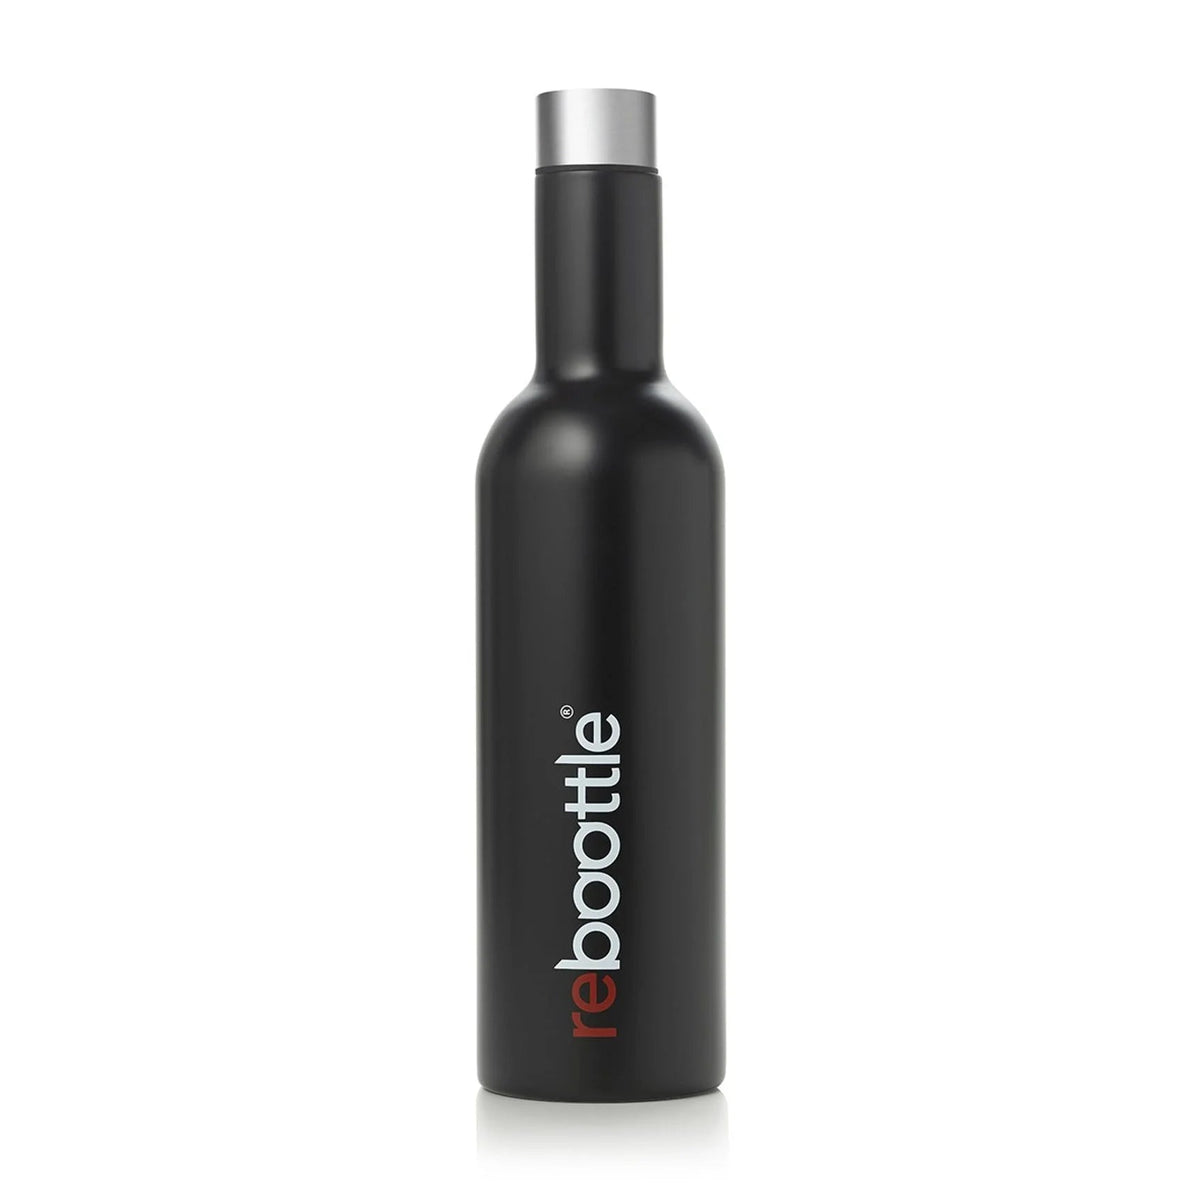 Rebootle Insulated Wine Bottle Flask - Black - The Mewstone Candle Co